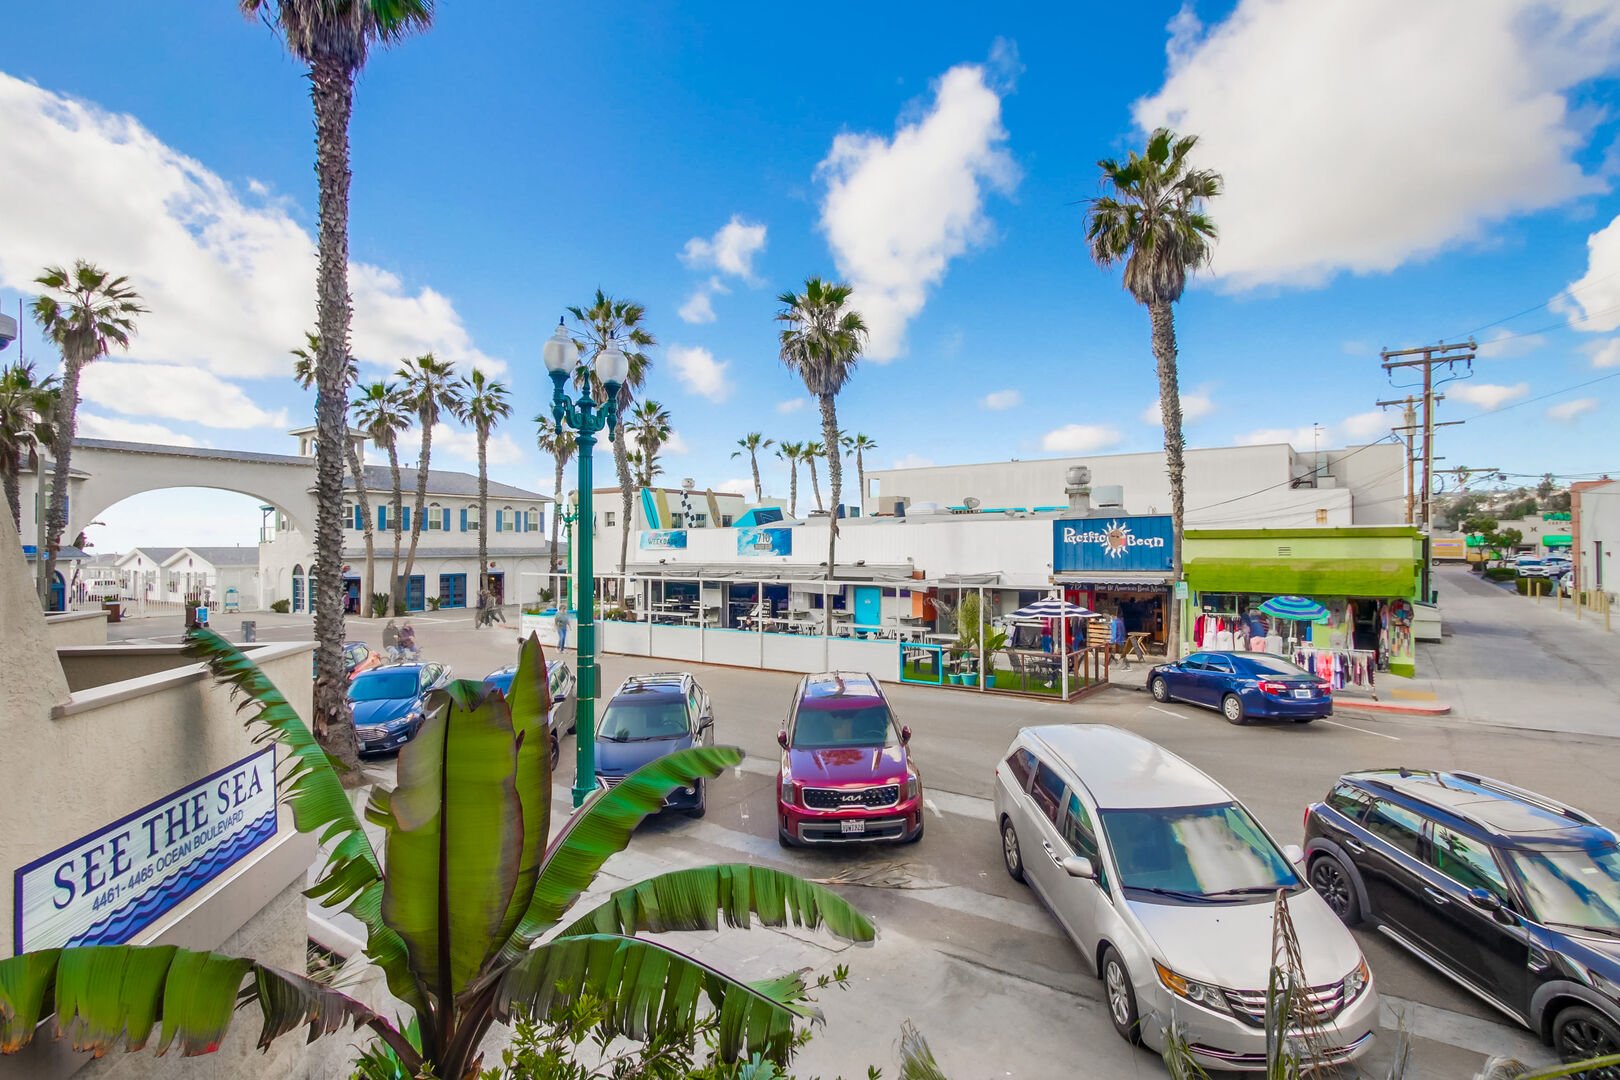 See the Sea is located right by Crystal Pier in Pacific Beach!